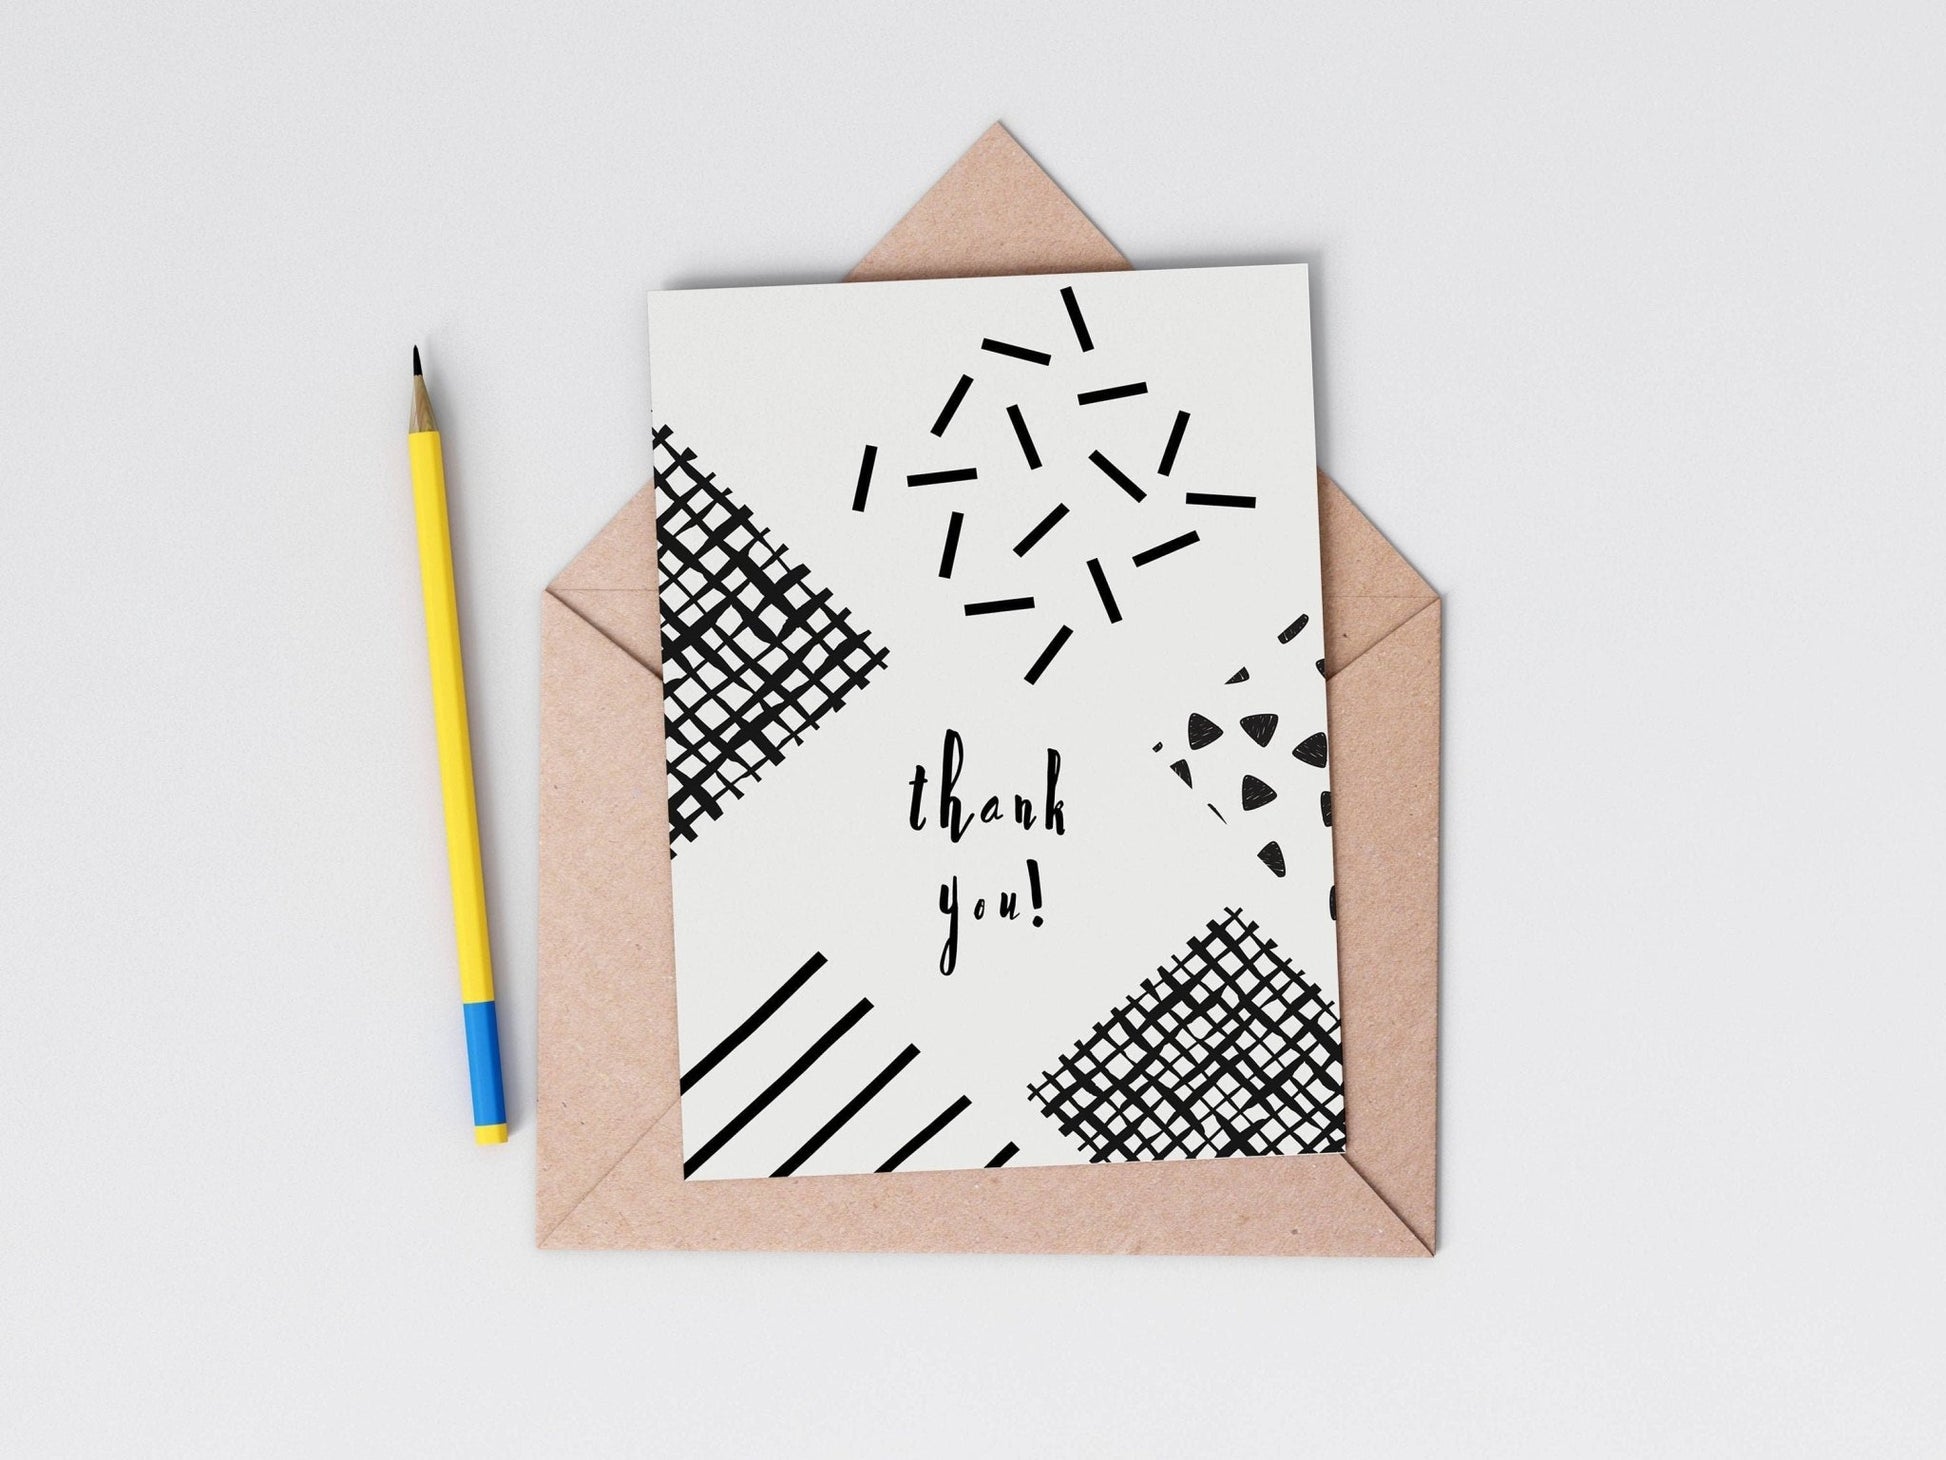 Modern Thank You Card from the Thank You card collection by Greenwich Paper Studio